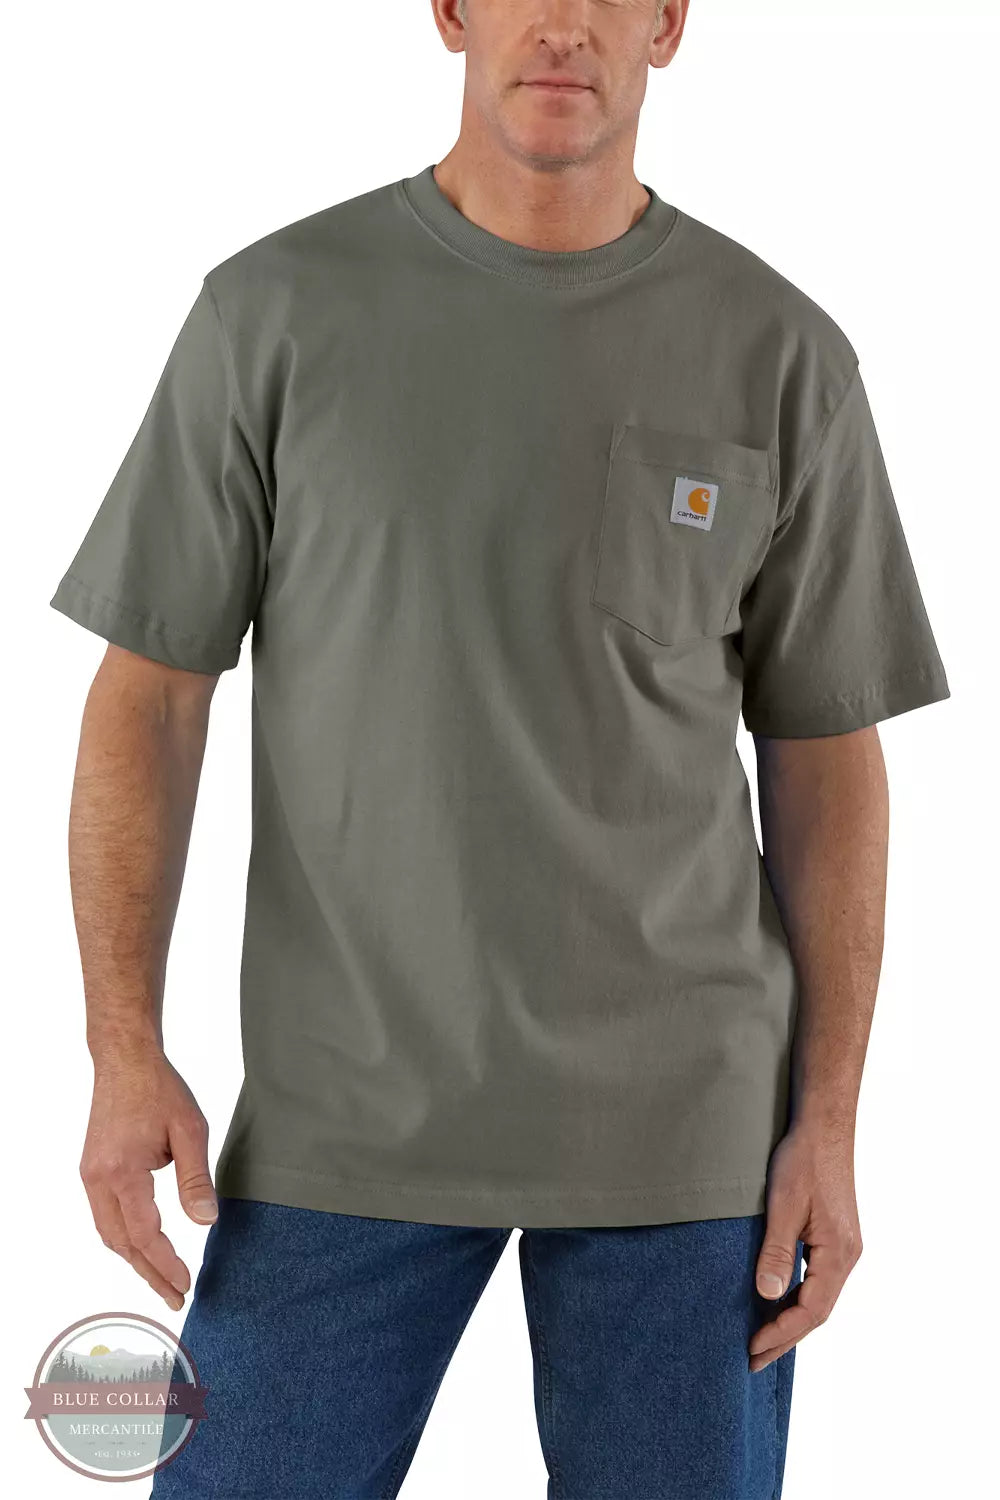 Carhartt K87 Loose Fit Heavyweight Short Sleeve Pocket T-Shirt Big and Tall Basic Colors Dusty Olive Front View